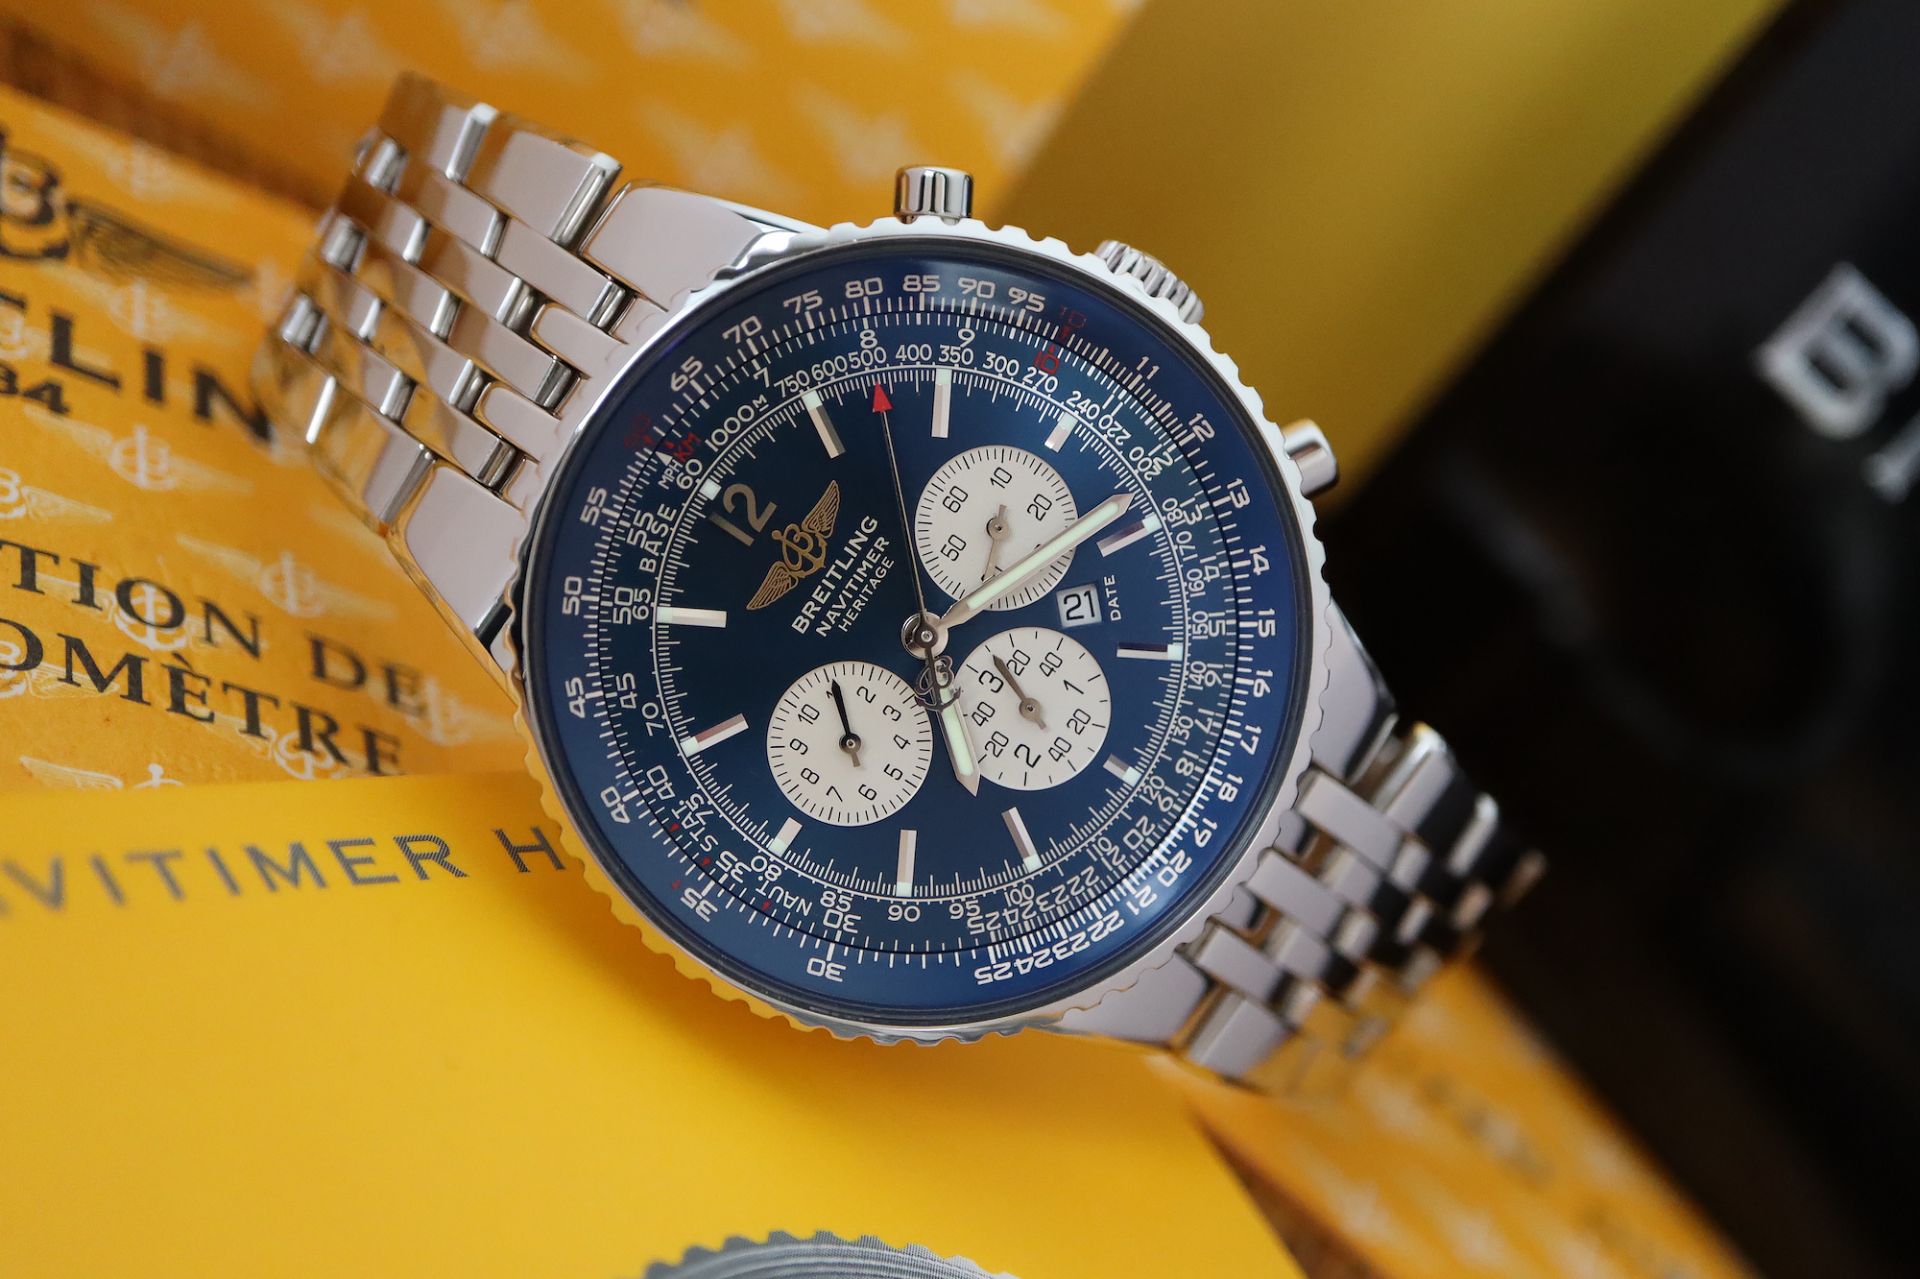 BREITLING NAVITIMER HERITAGE CHRONOGRAPH (REF. A35350) 'FULL SET - BOX, CERTS. ETC.' NAVY DIAL - Image 4 of 16